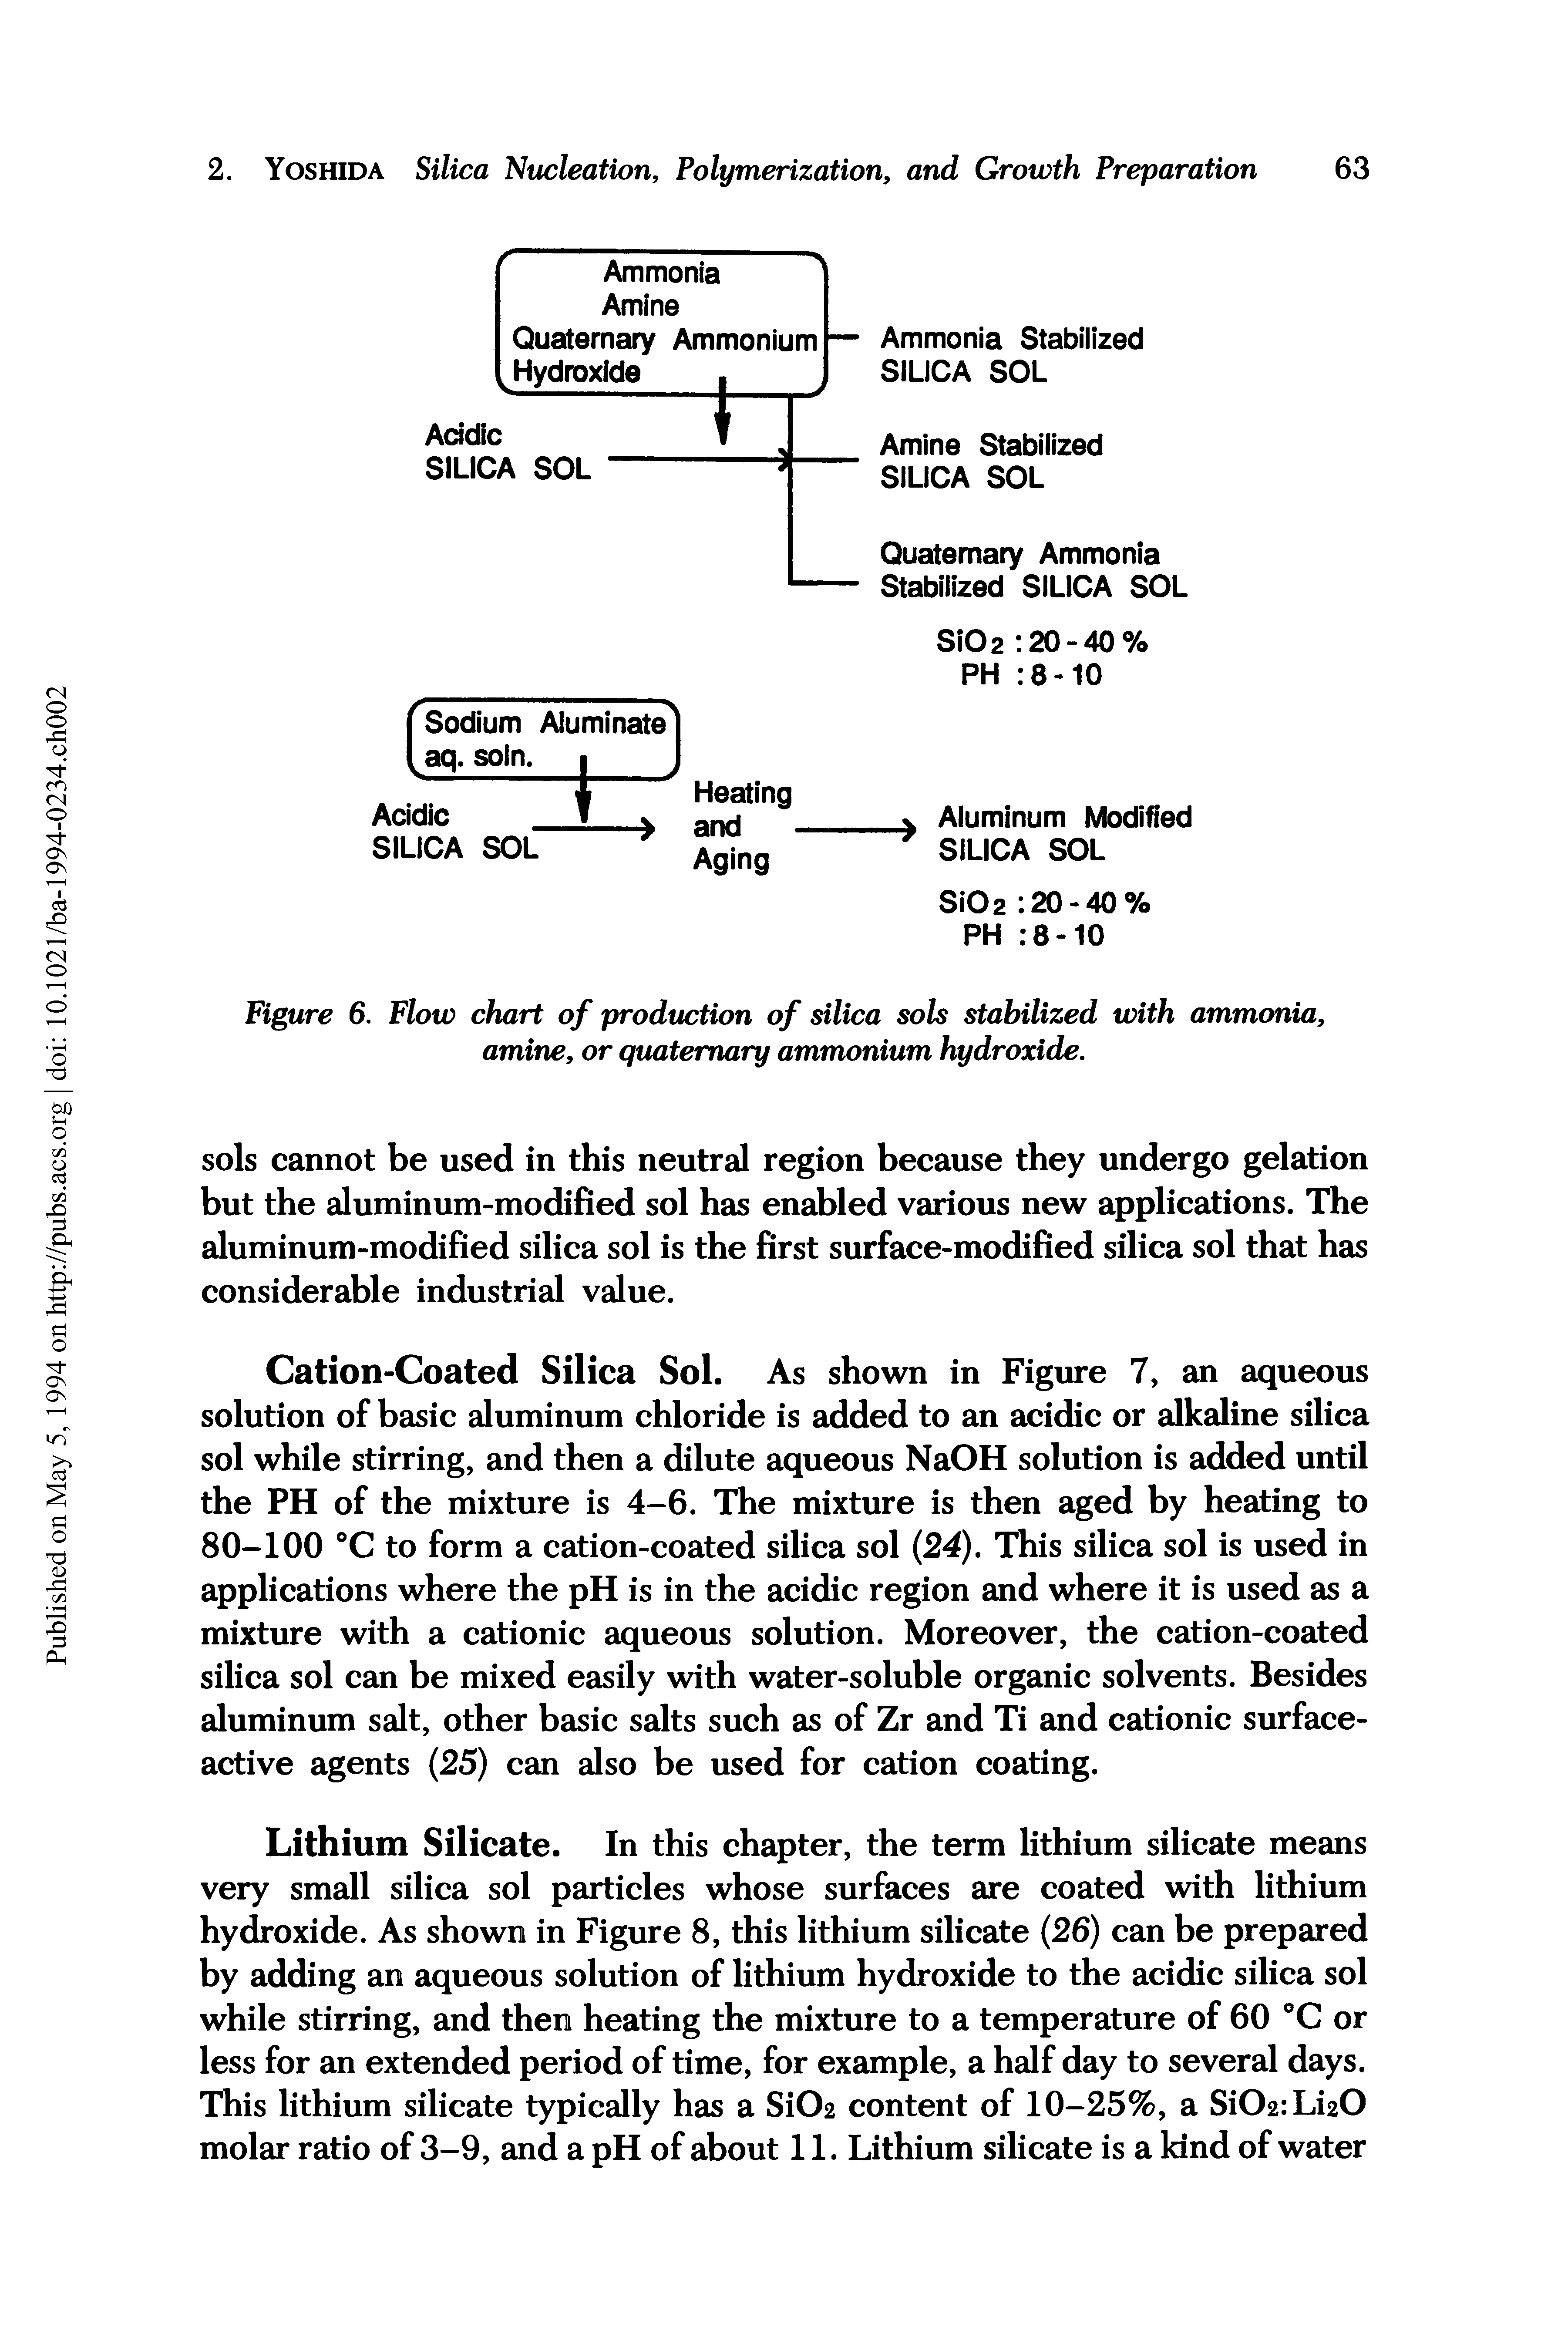 Figure 6. Flow chart of production of silica sols stabilized with ammonia, amine, or quaternary ammonium hydroxide.